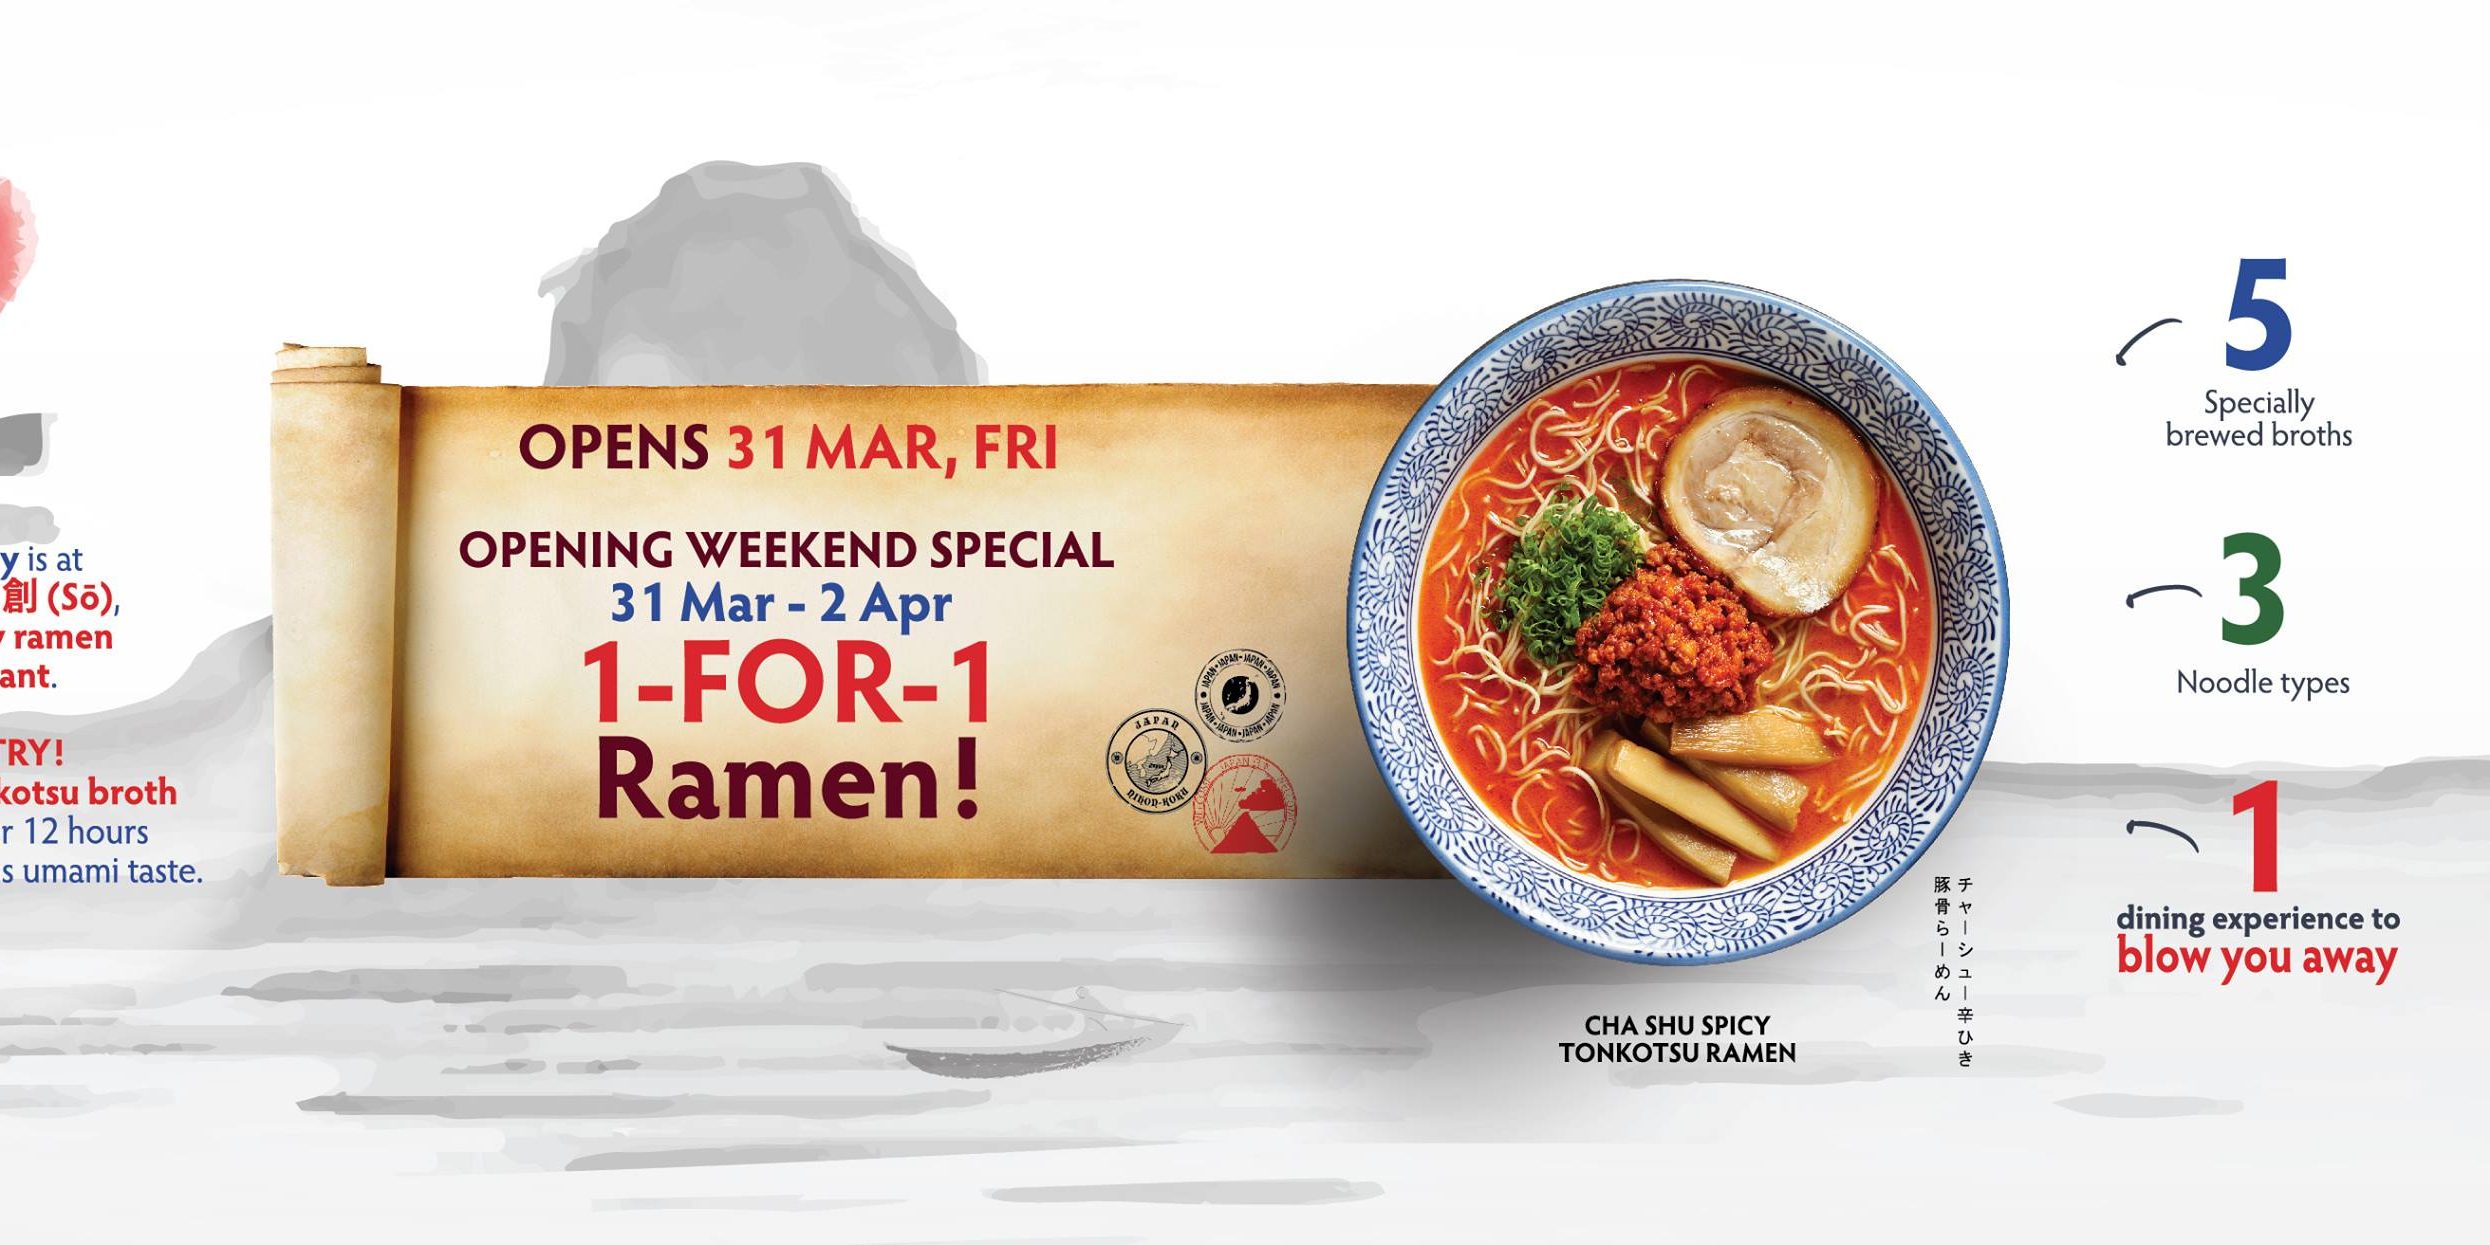 Sō Singapore 1-For-1 Ramen Opening Weekend Special Promotion 31 Mar – 2 Apr 2017